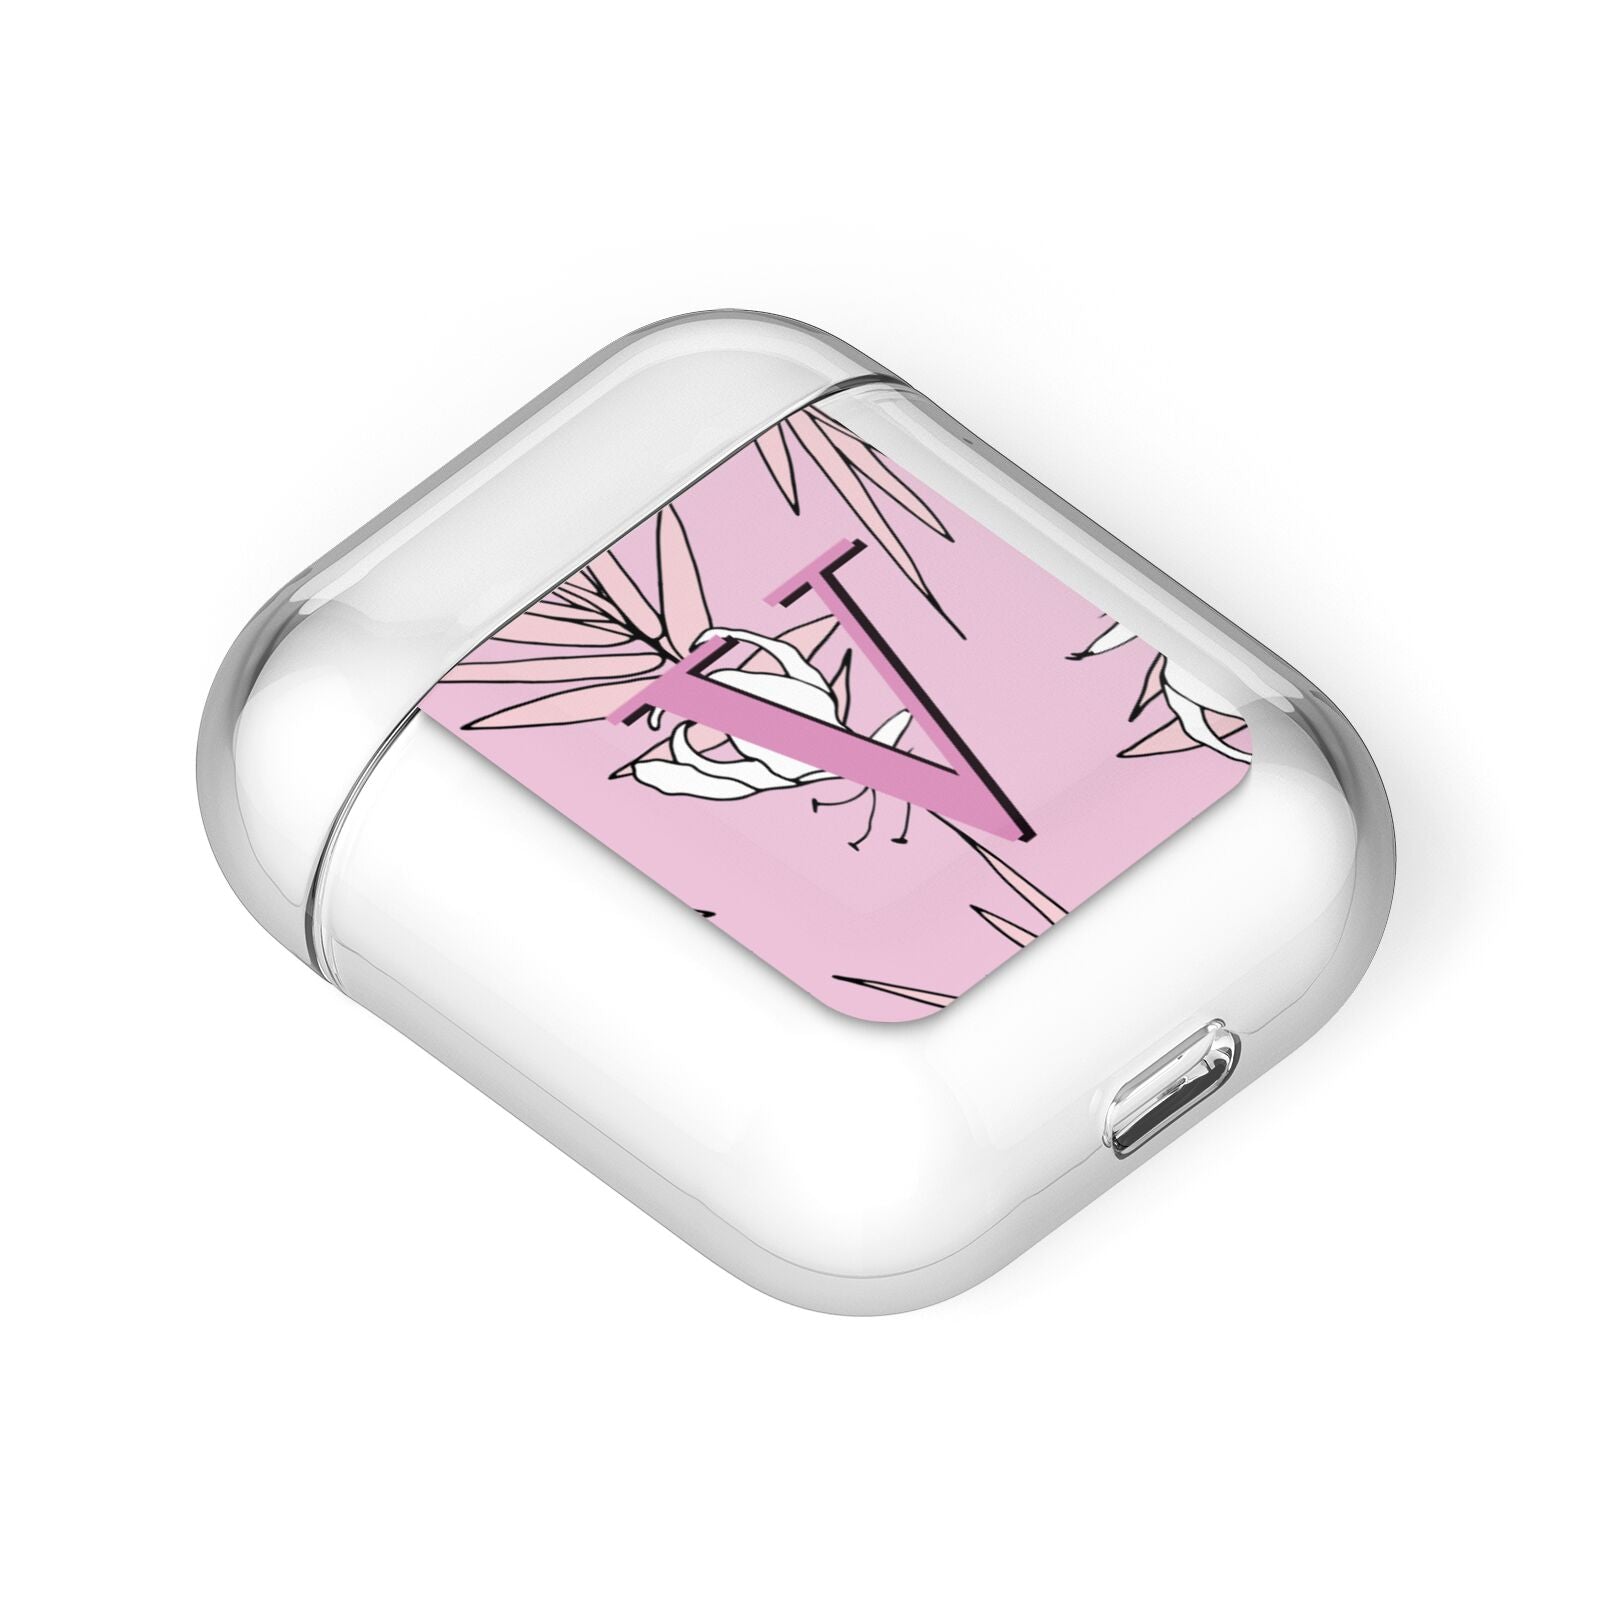 Personalised Pink and White Floral Monogram AirPods Case Laid Flat